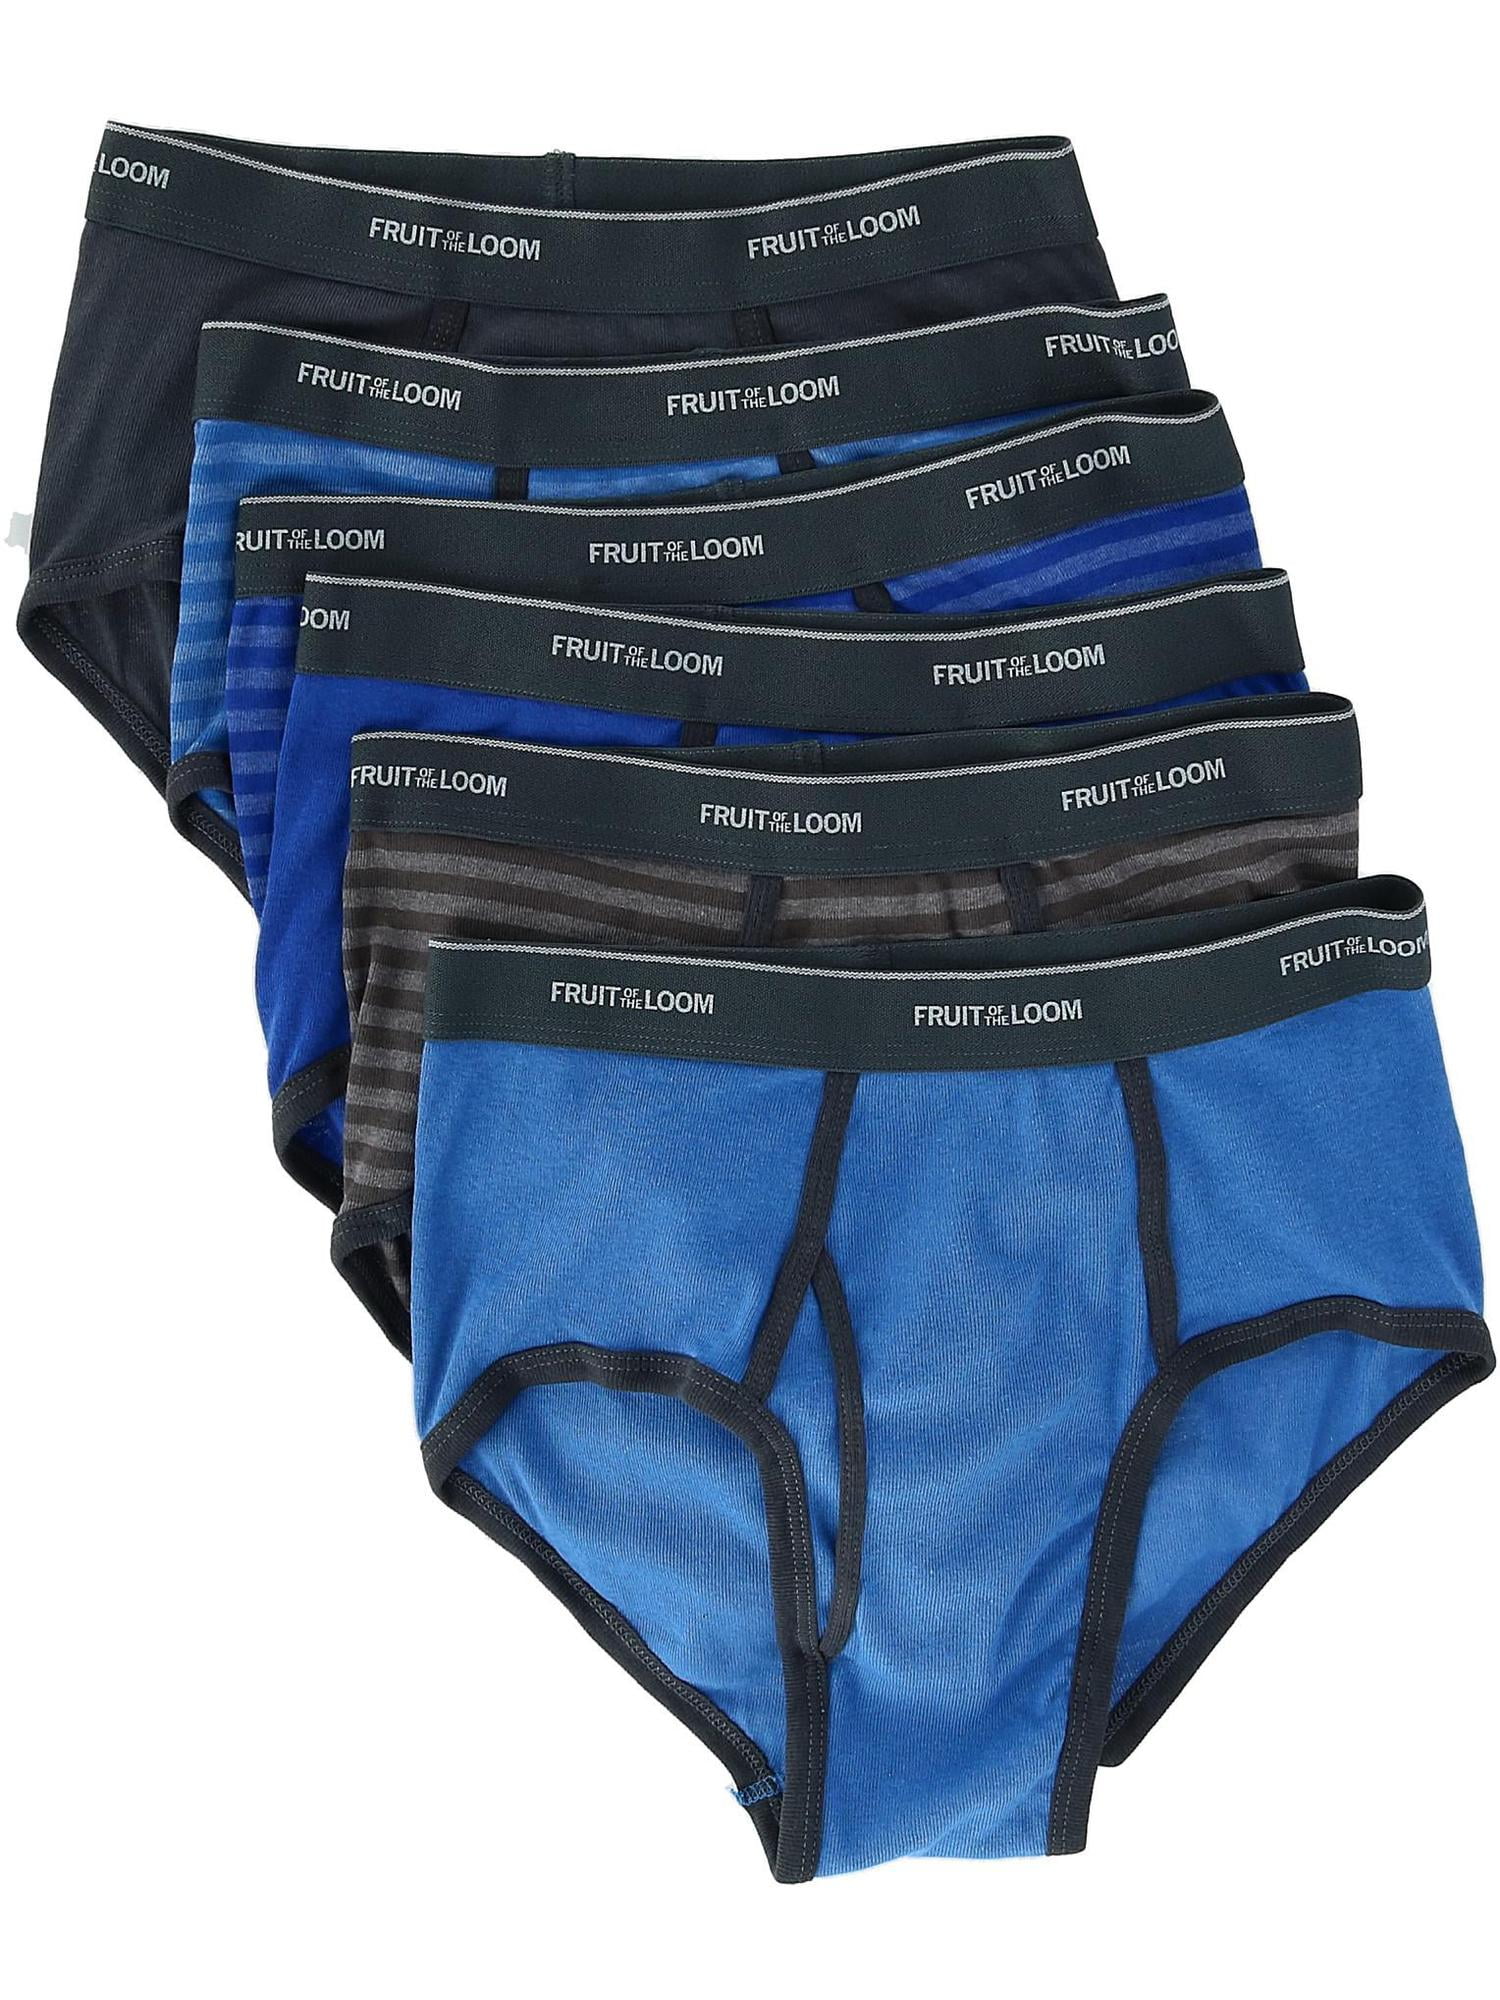 Fruit of the Loom Mens Fashion Briefs, 6 Pack Palestine